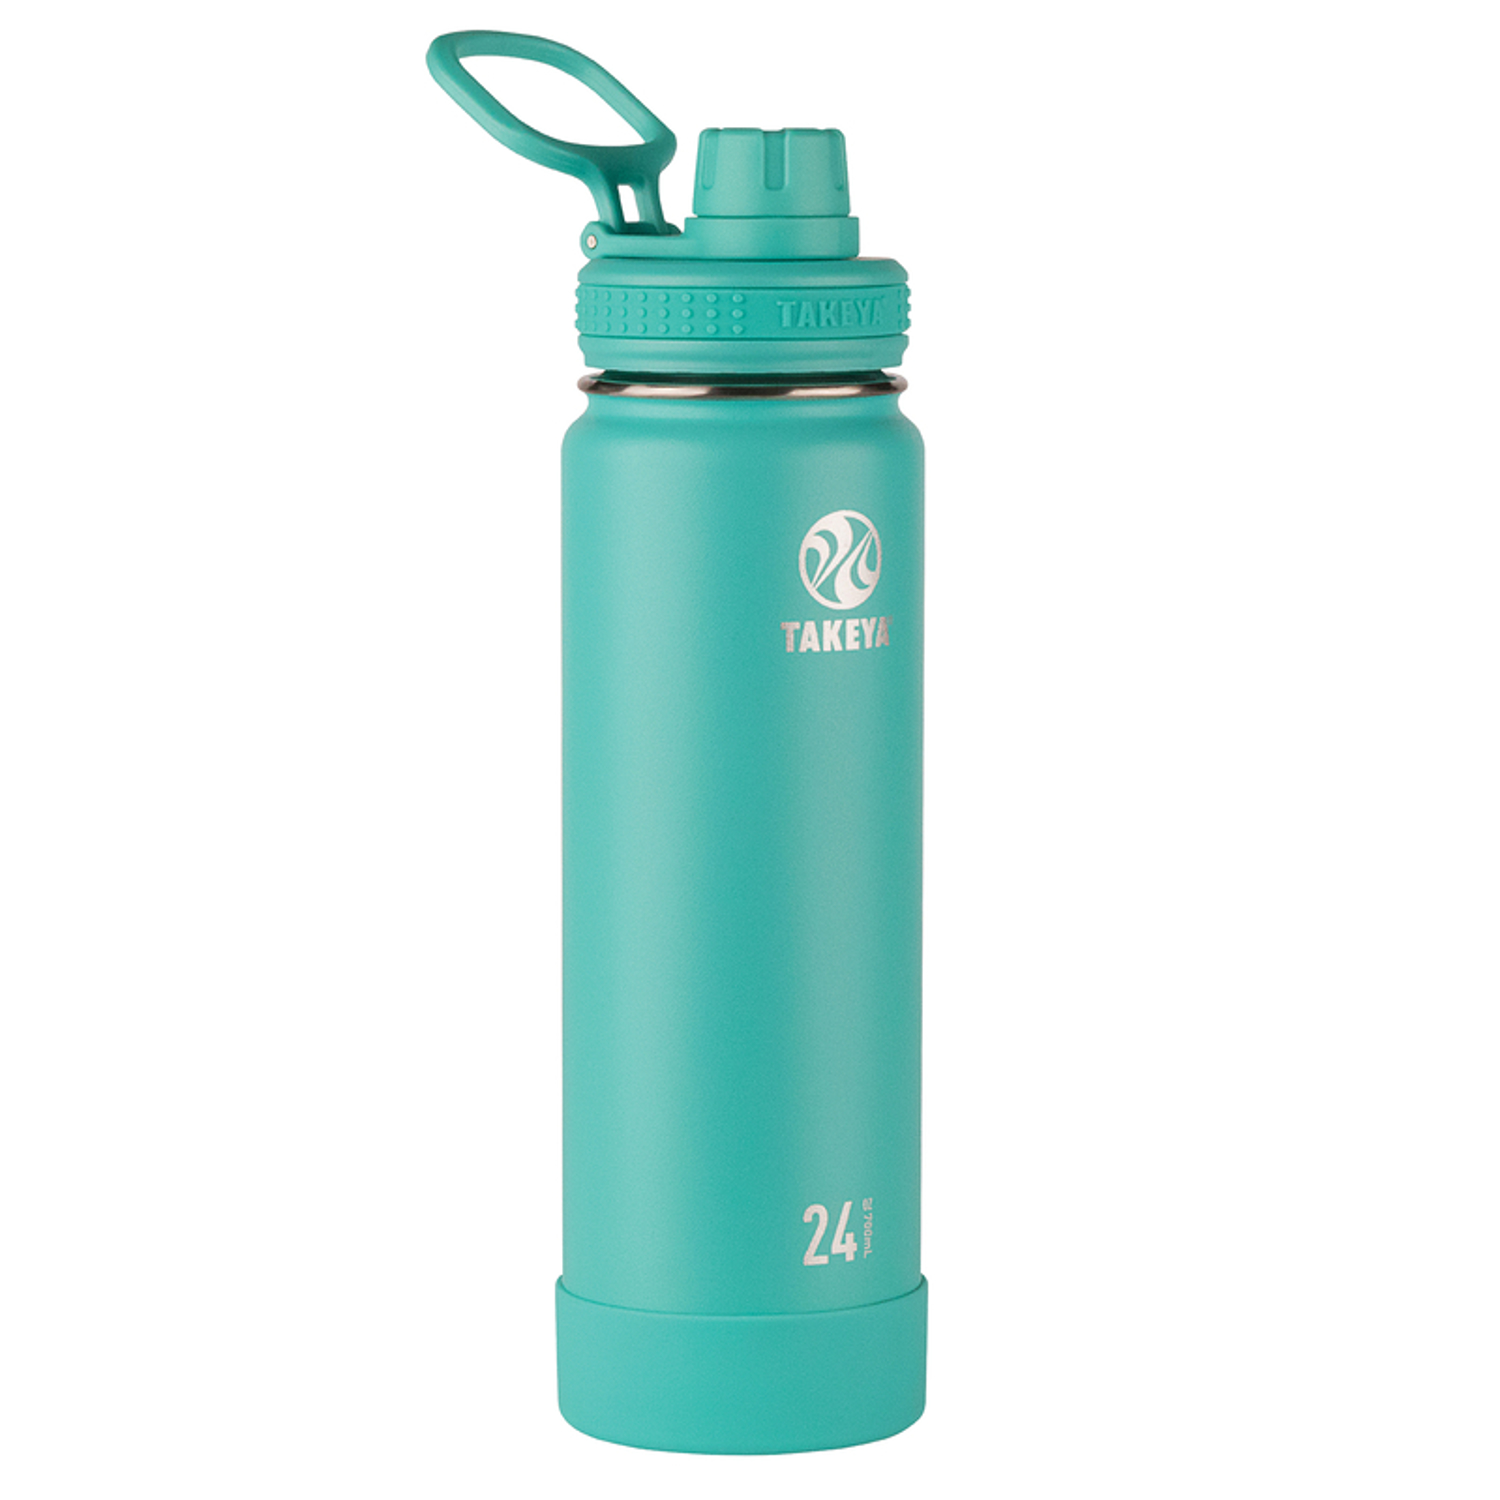 Photos - Other Accessories Takeya Actives 24 oz Teal BPA Free Double Wall Water Bottle 51048